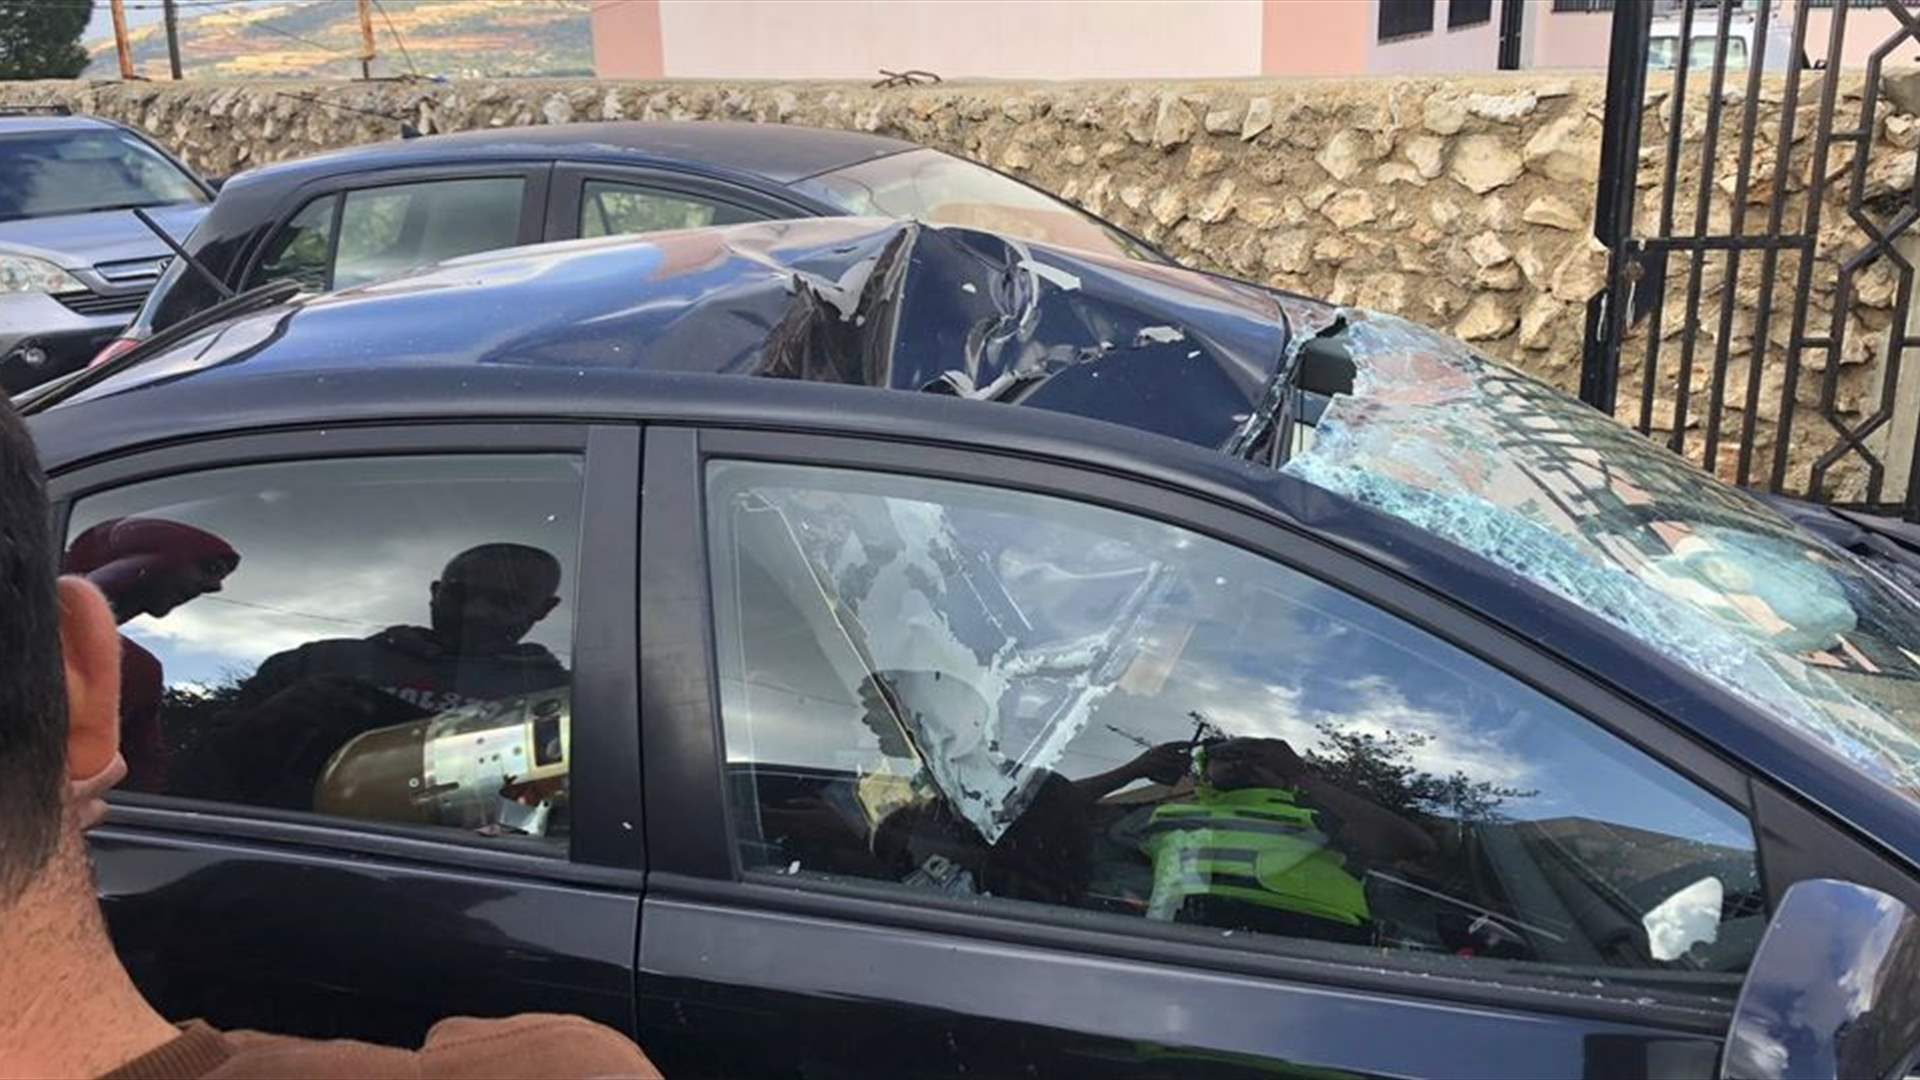 Israeli Army strikes car in southern Lebanon linked to rocket launches